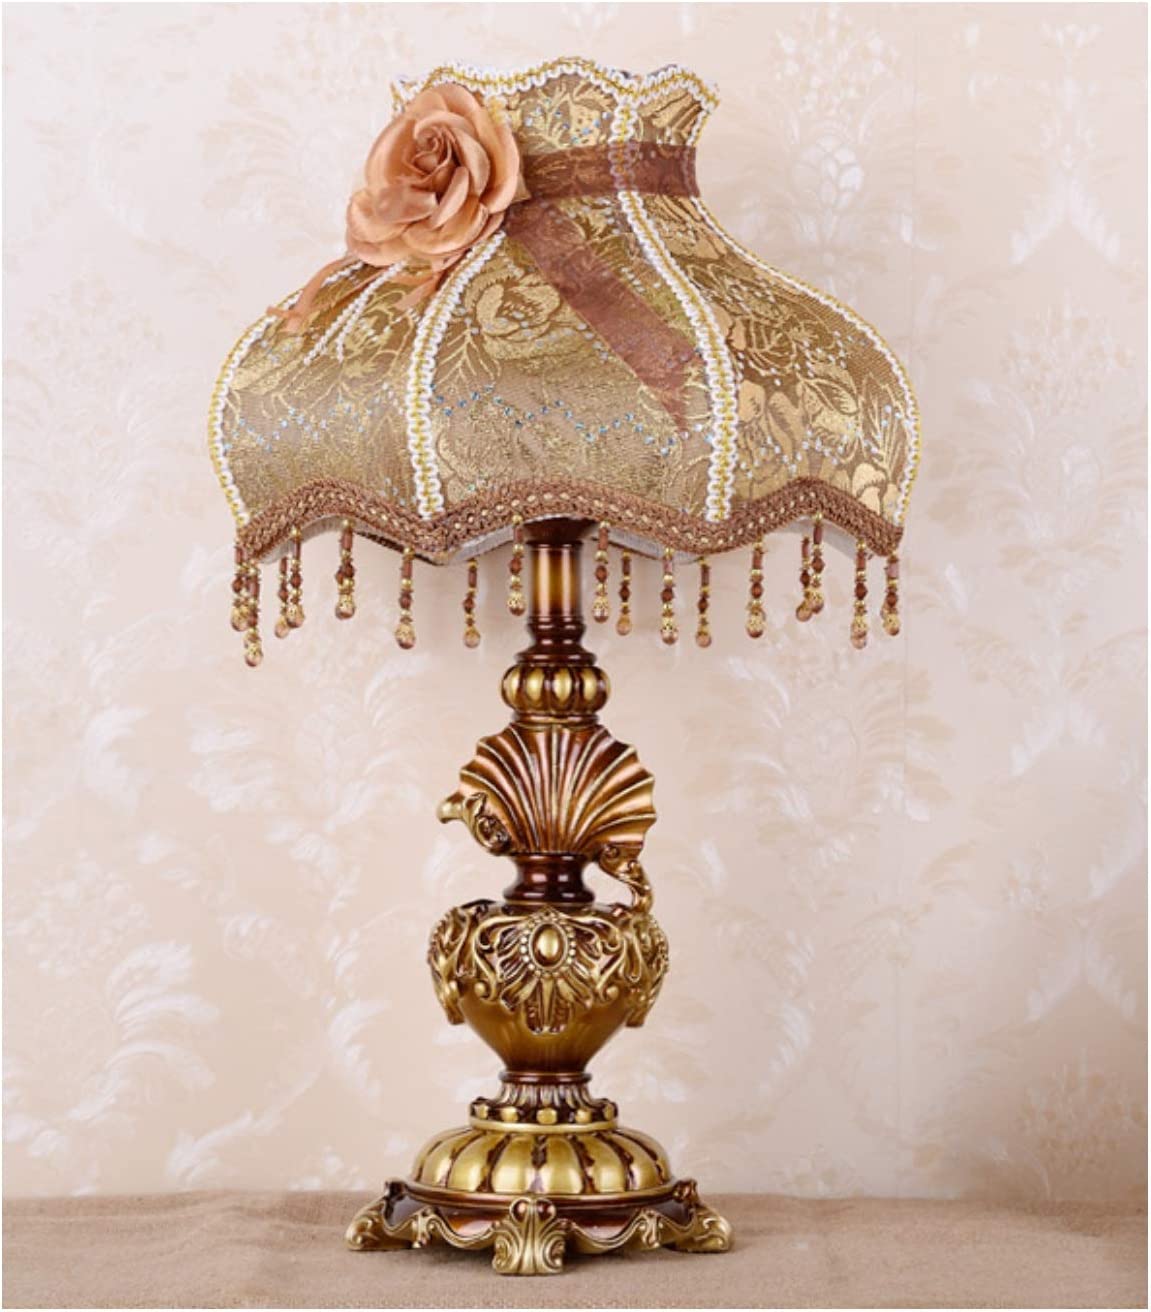 Traditional Table Lamp Brown Handmade Victorian Style Lace Fabric Lampshade Bedside Lamp Antique Painted Resin Base Desk Lamp for Bedroom Living Room Office, 13" W, 22" H.